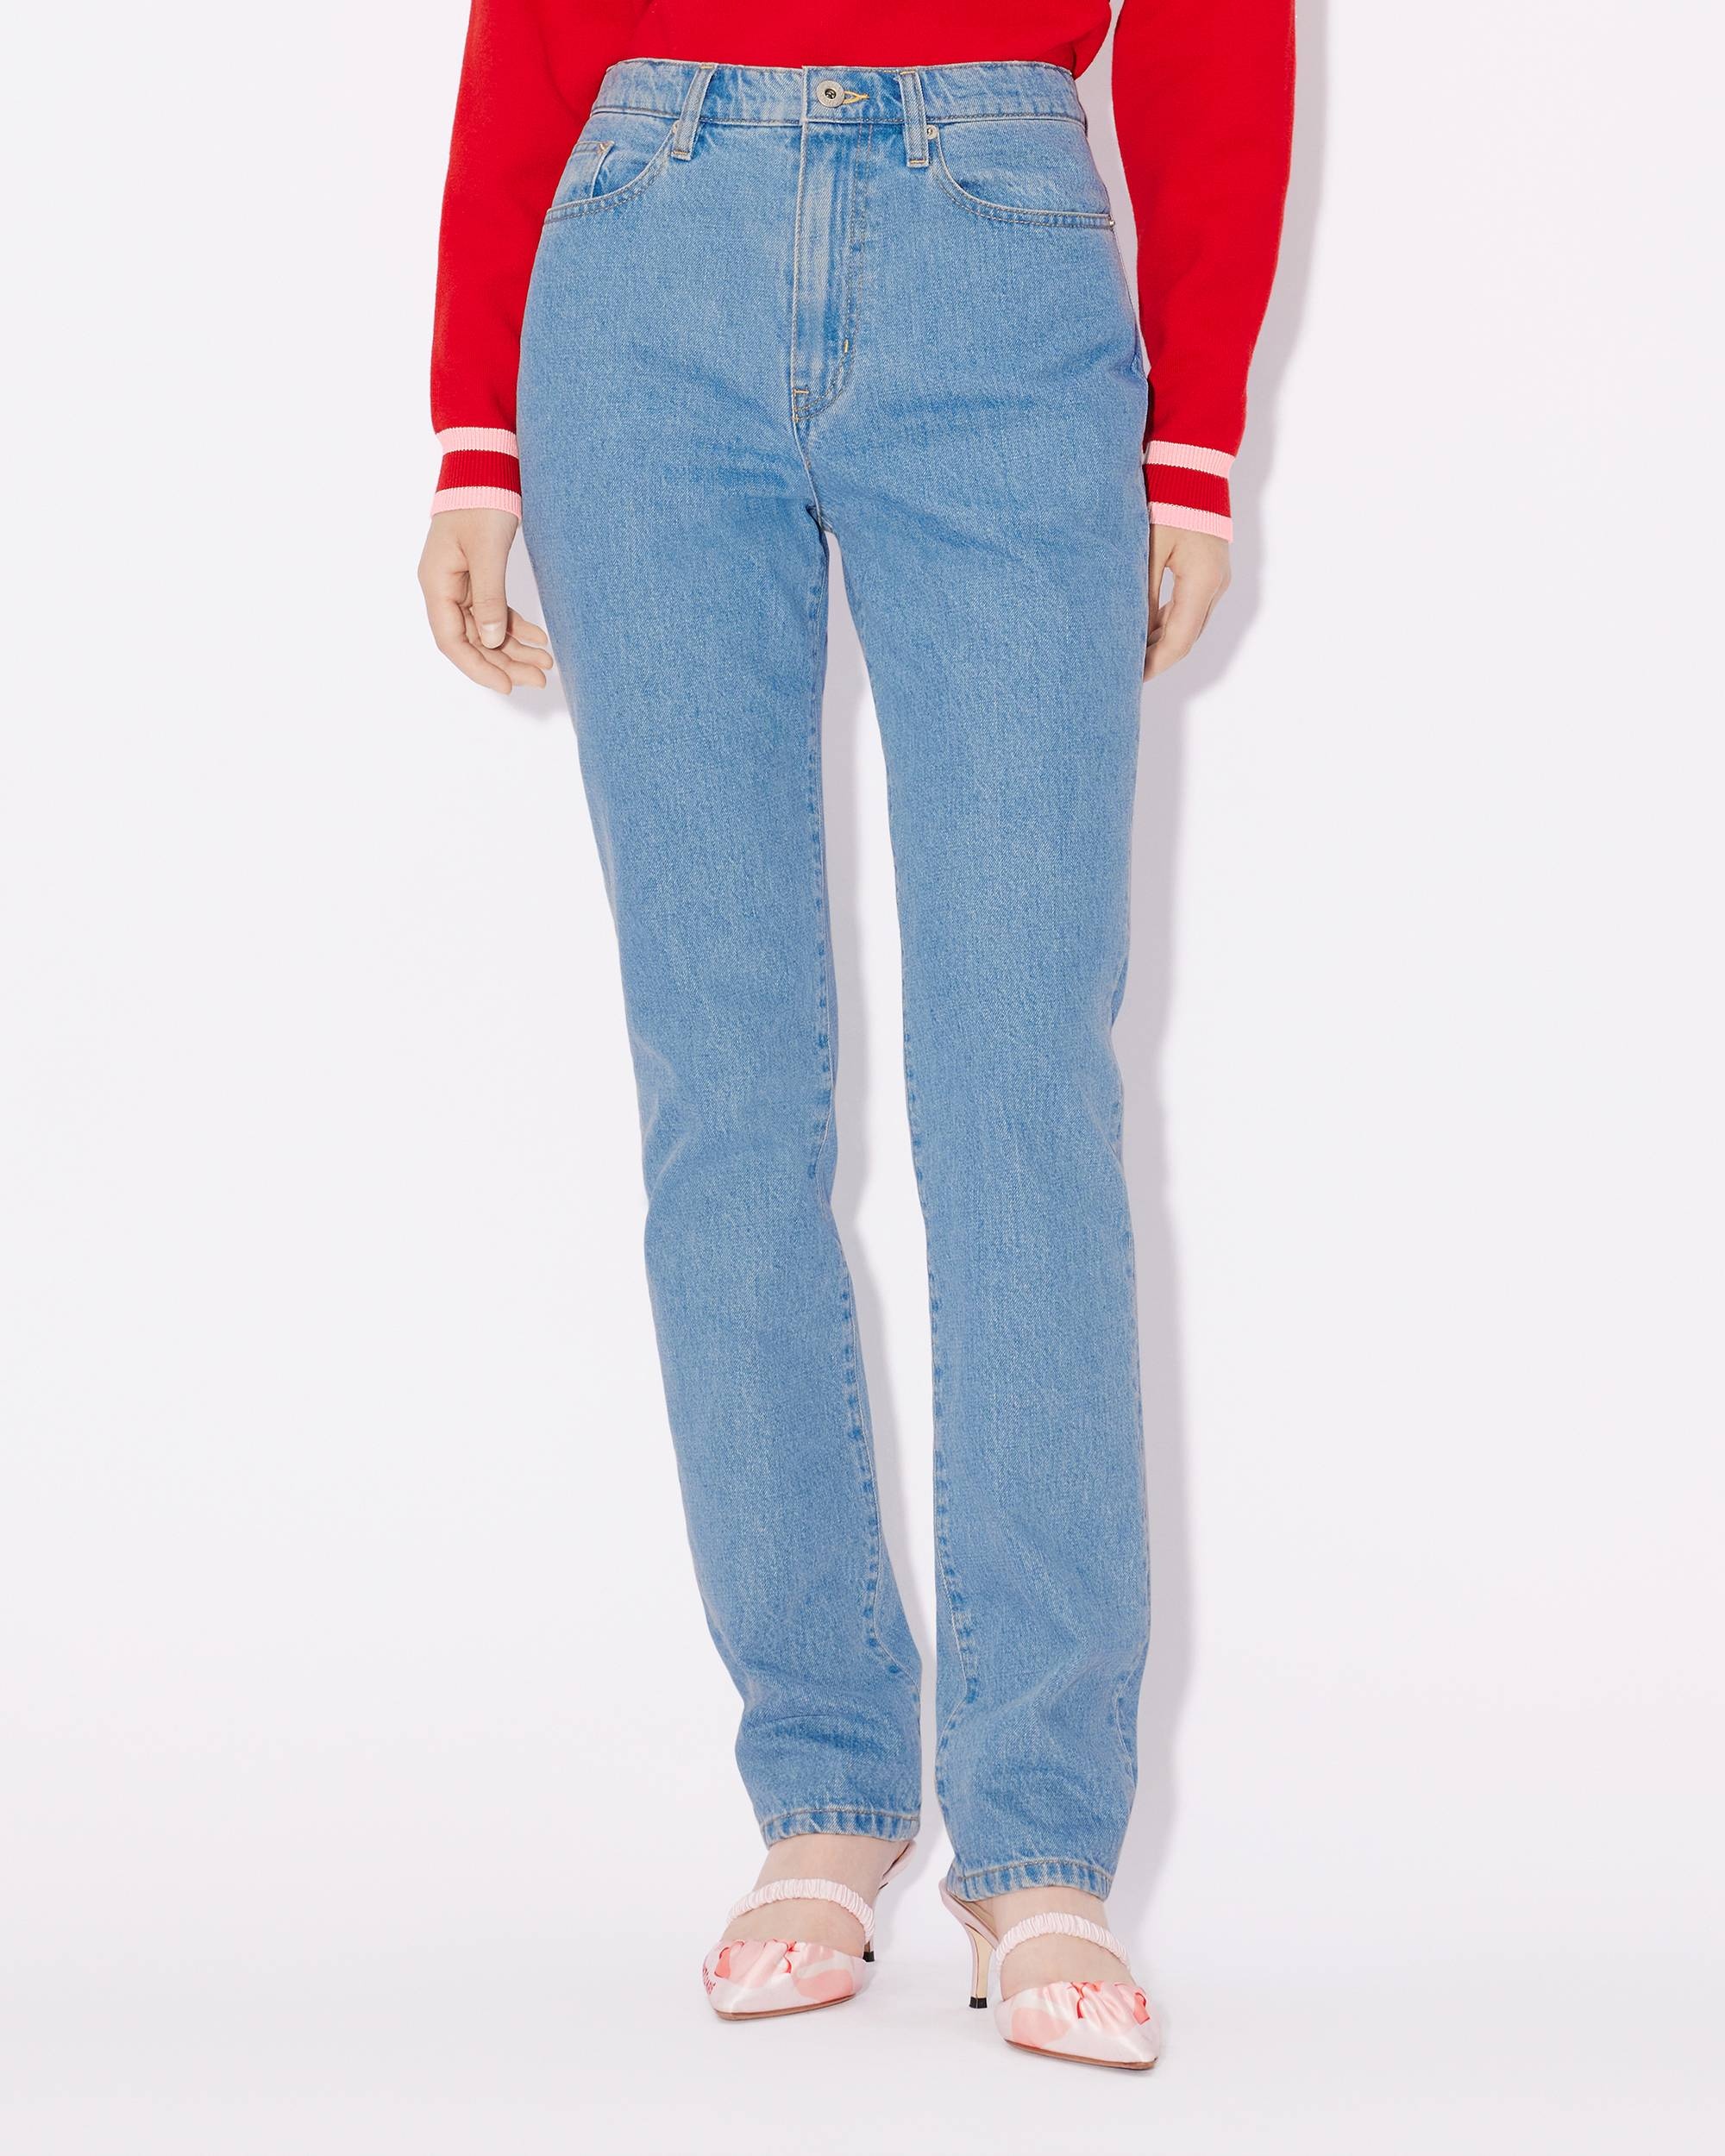 'Year of the Dragon' cropped embroidered ASAGAO jeans - 4